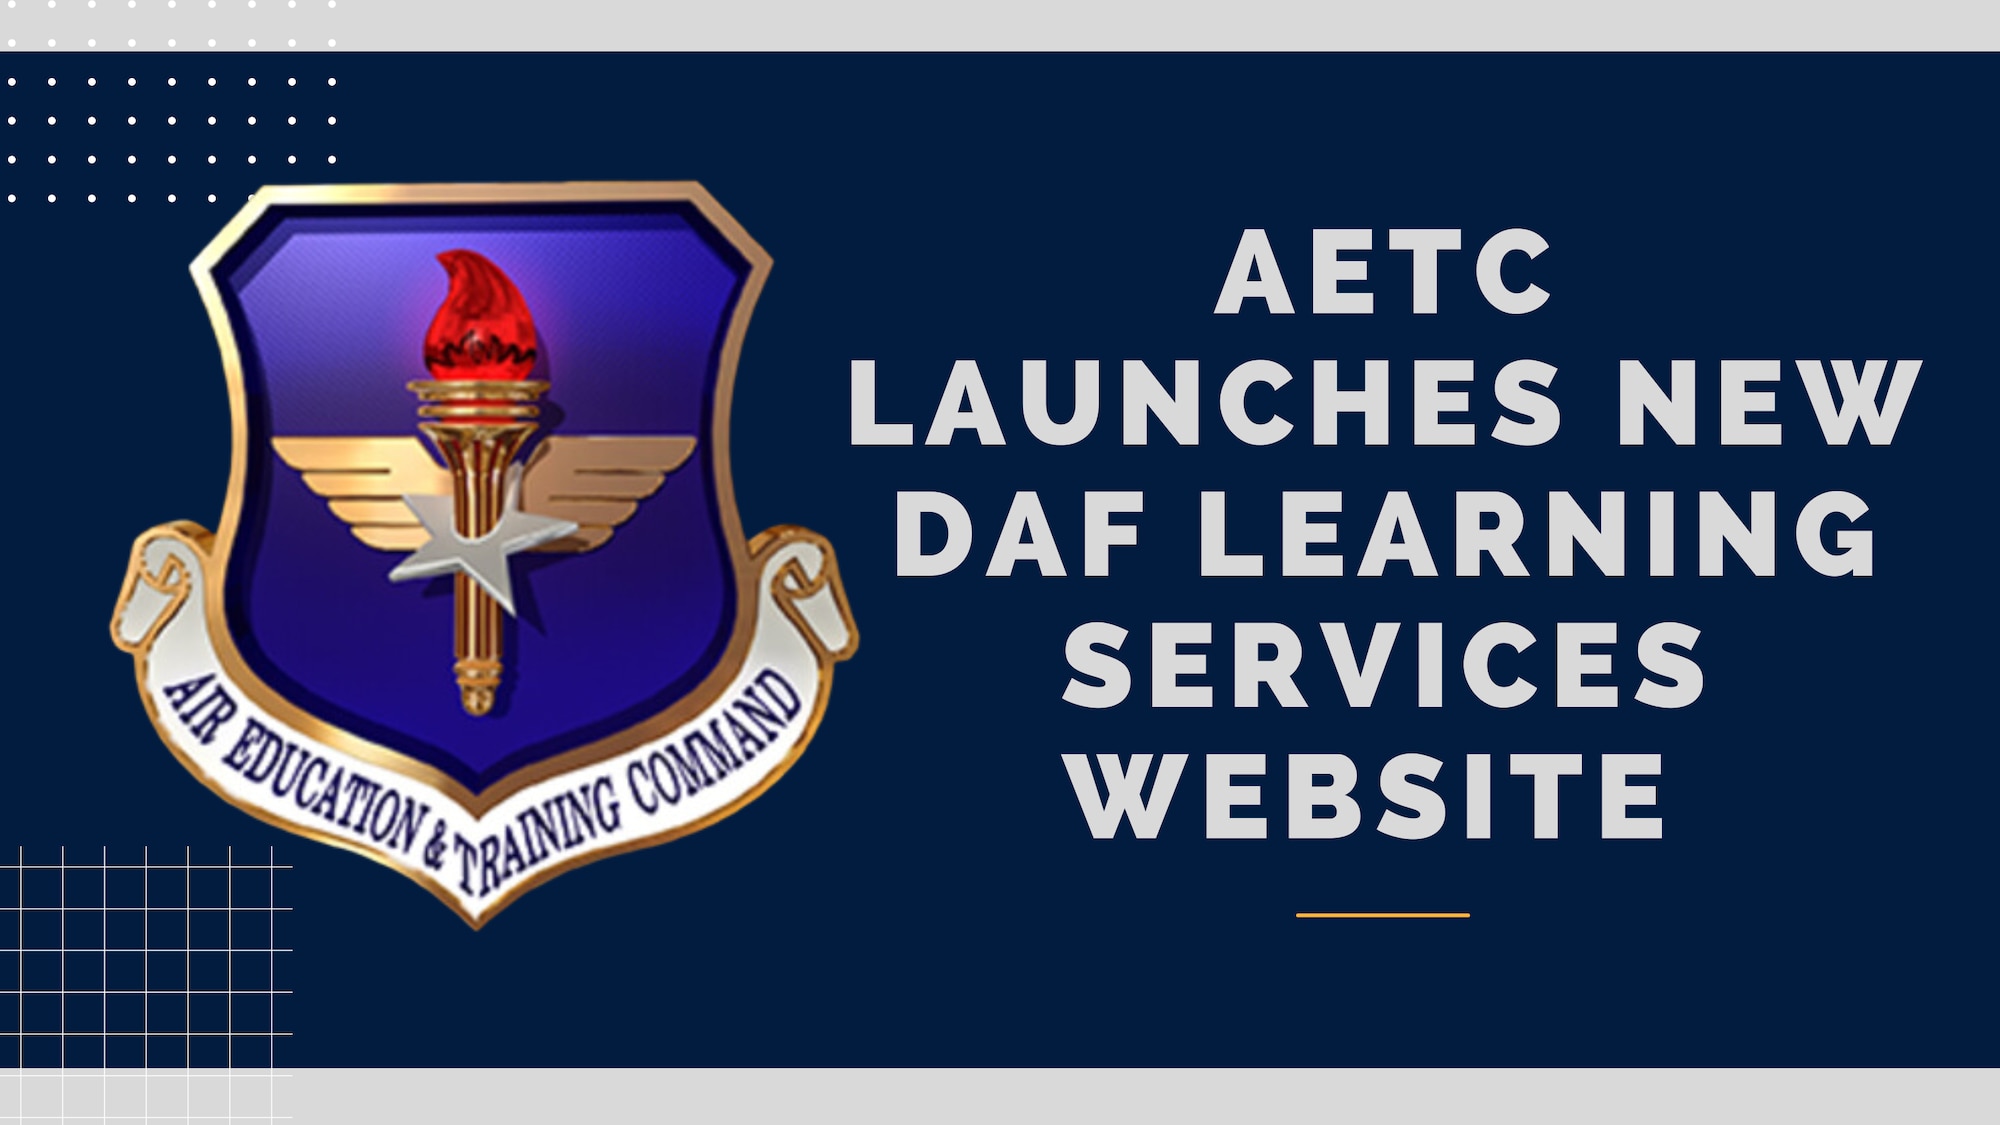 AETC shield on blue background